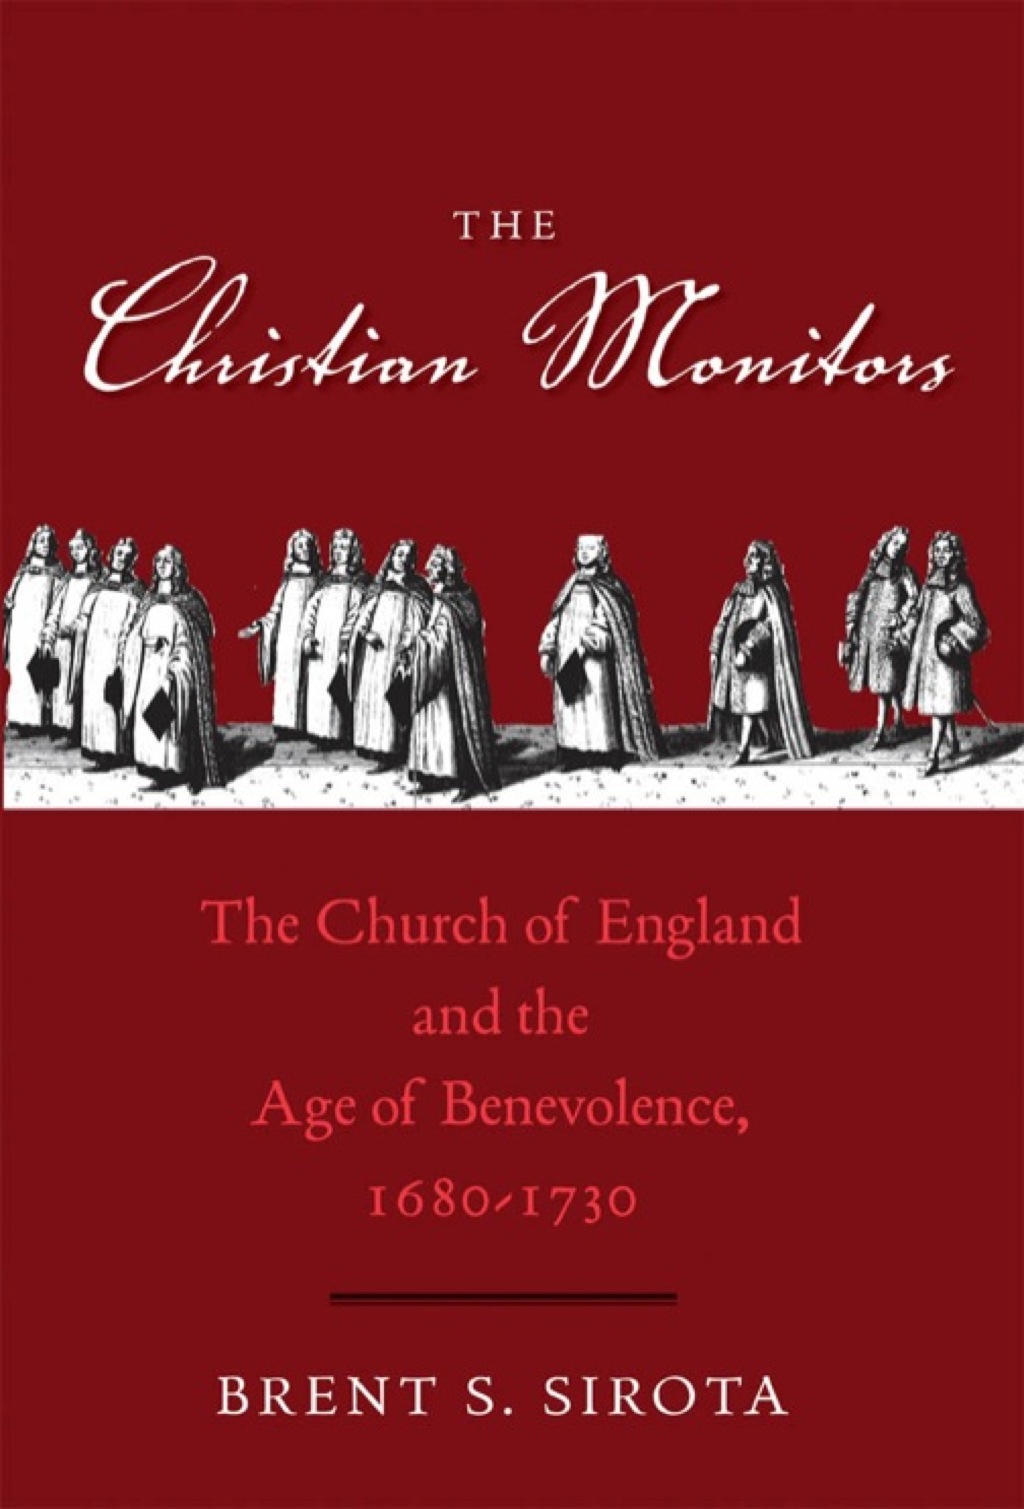 The Christian Monitors: The Church of England and the Age of Benevolence  1680-1730 (eBook) - Brent S. Sirota,